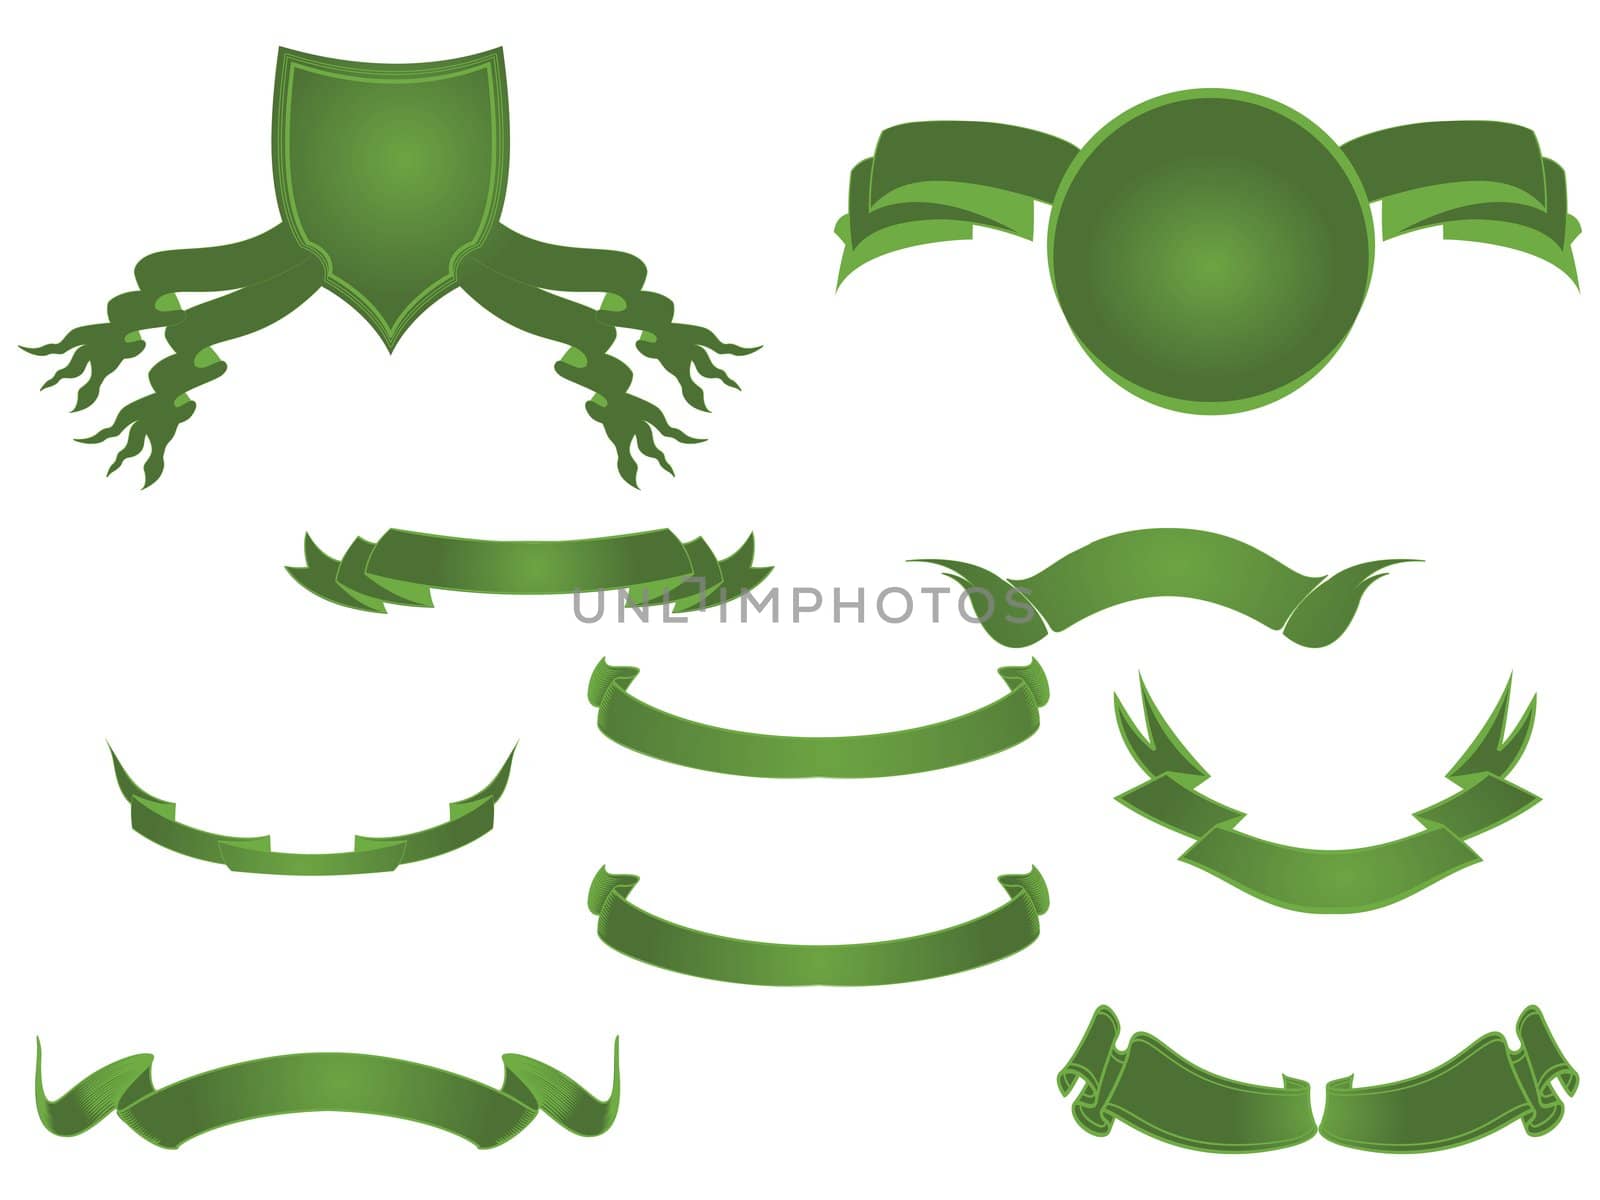 Shields and banners in green tones